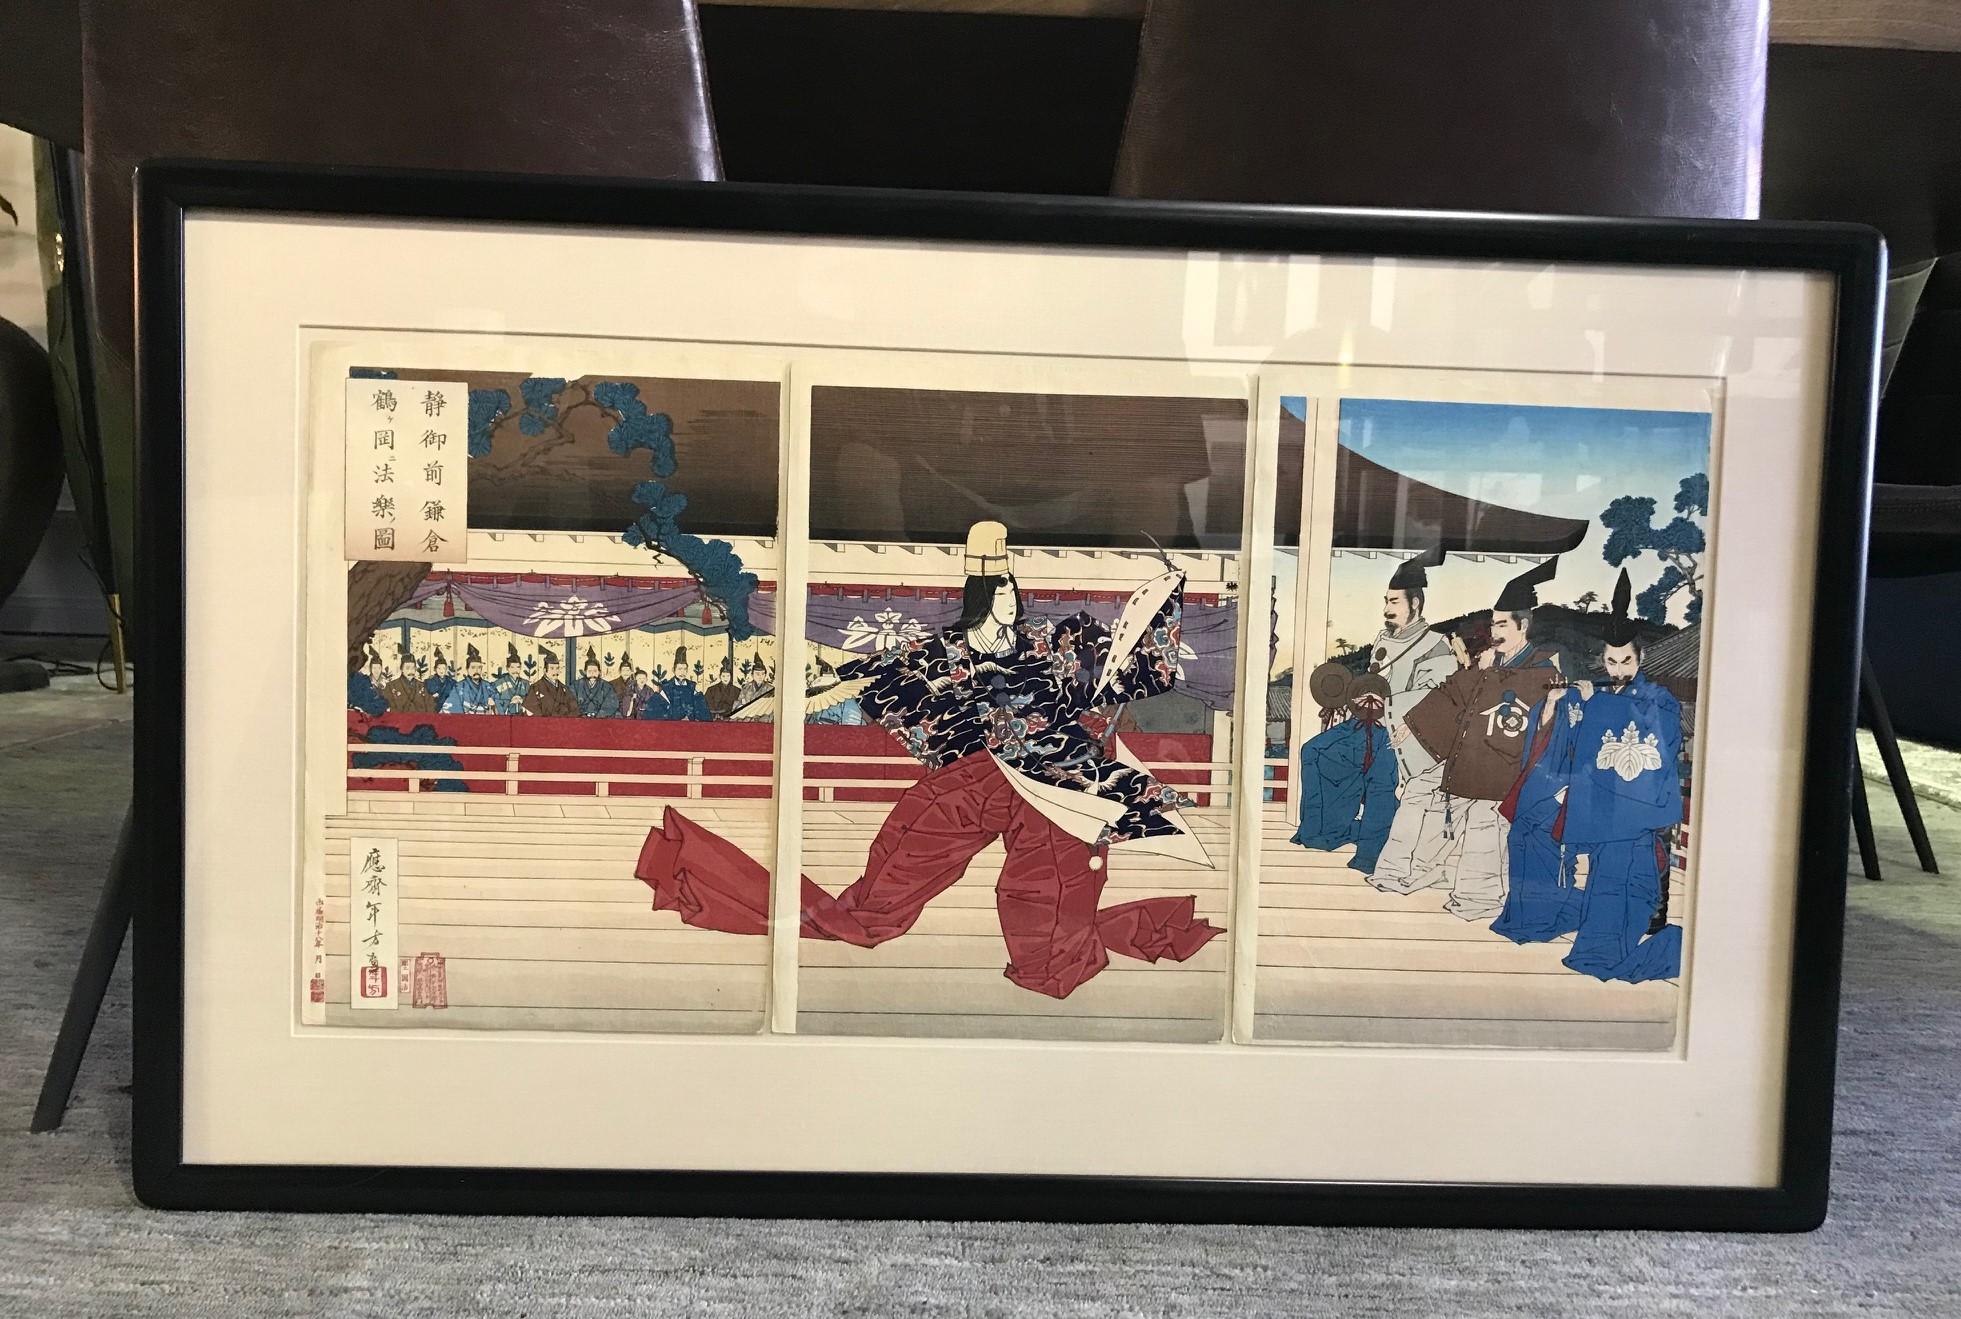 A rather wonderful and extremely rare woodblock triptych print by famed Japanese artist Tsukioka Yoshitoshi titled 